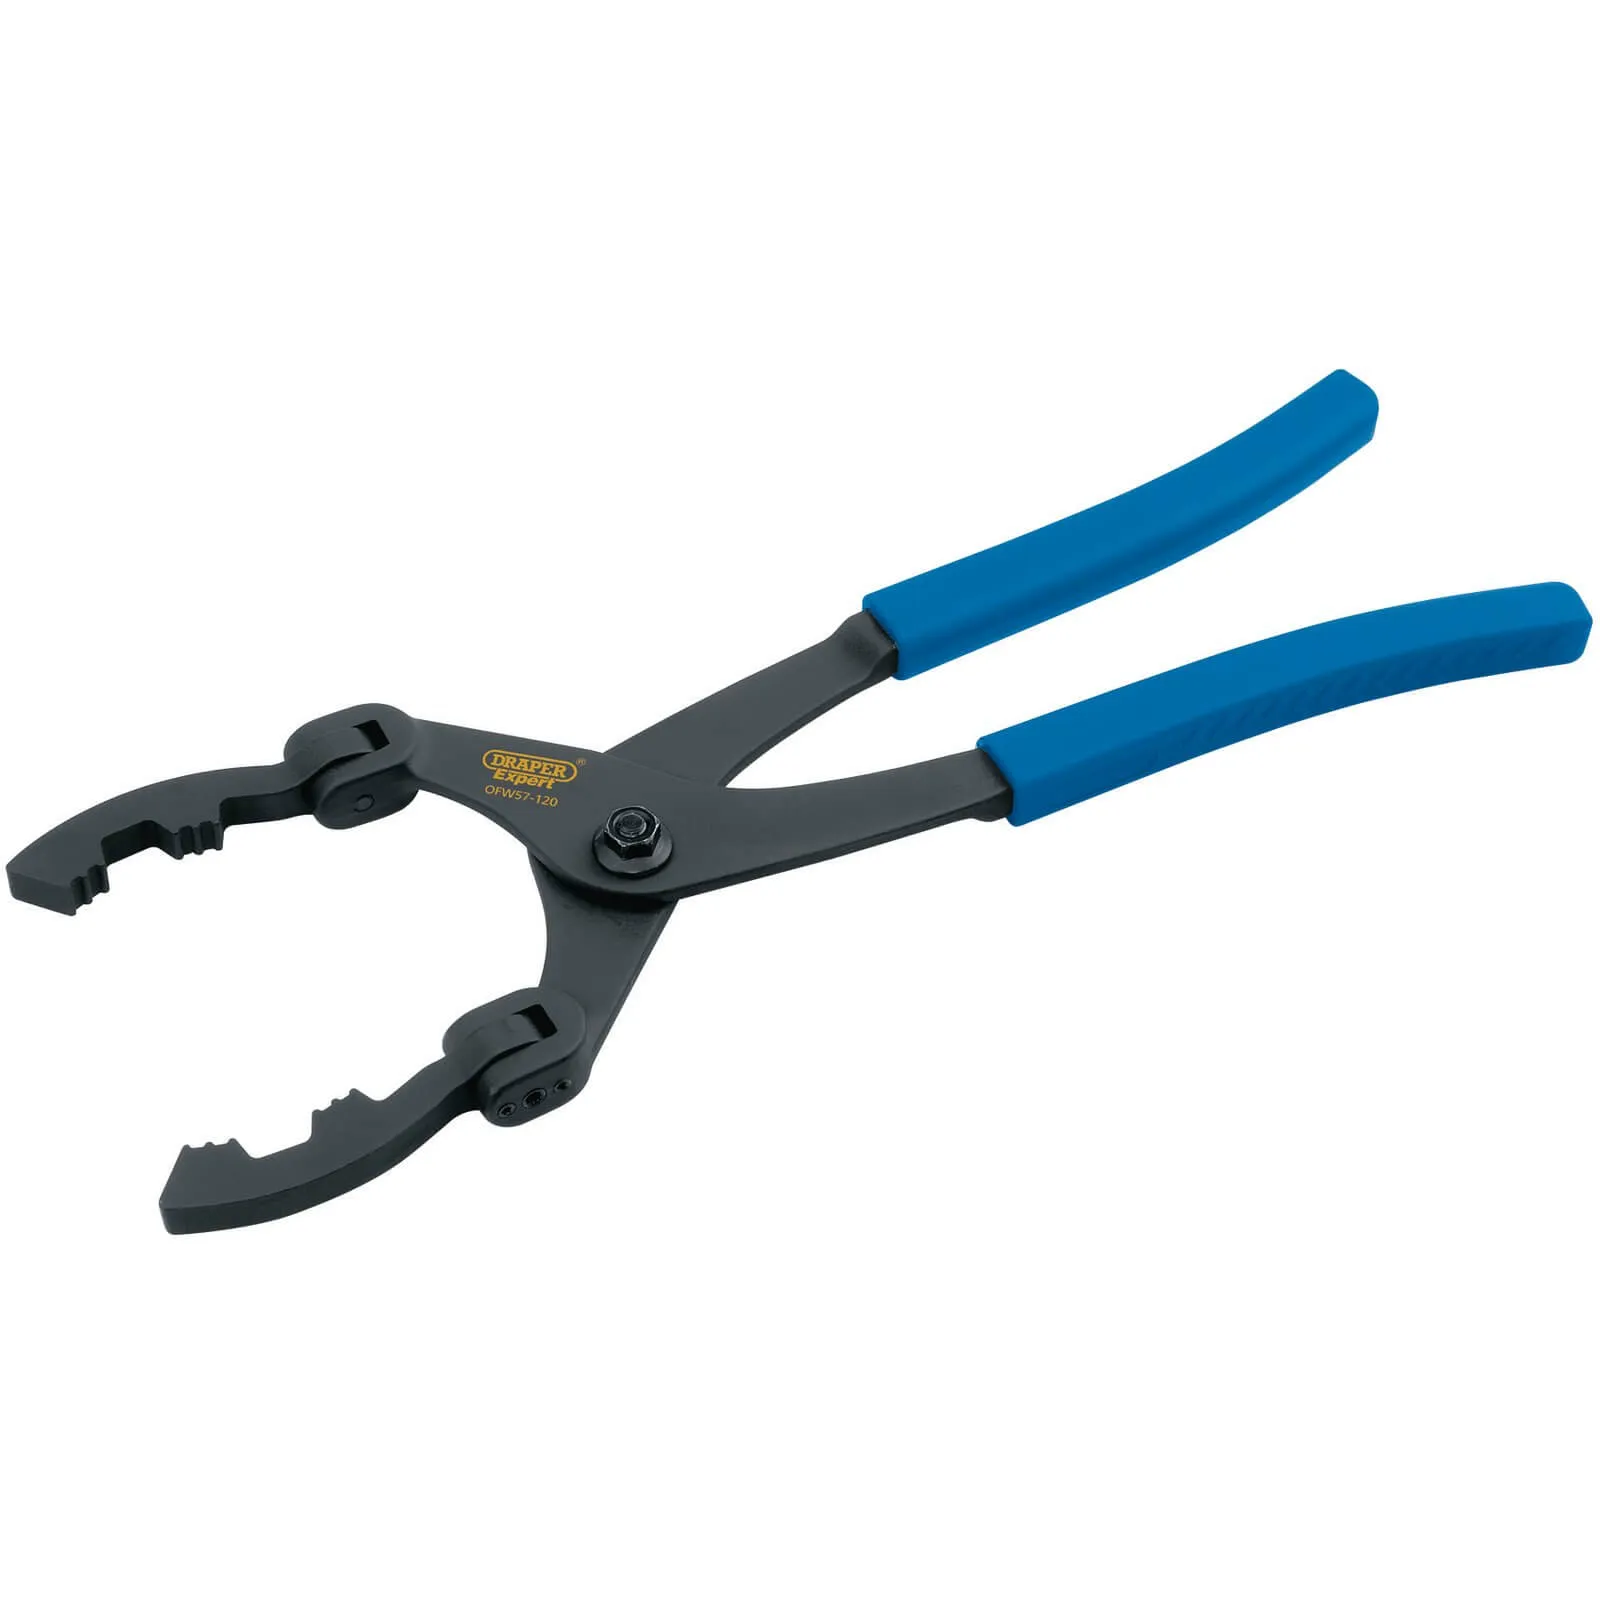 Draper Expert Oil and Fuel Filter Pliers